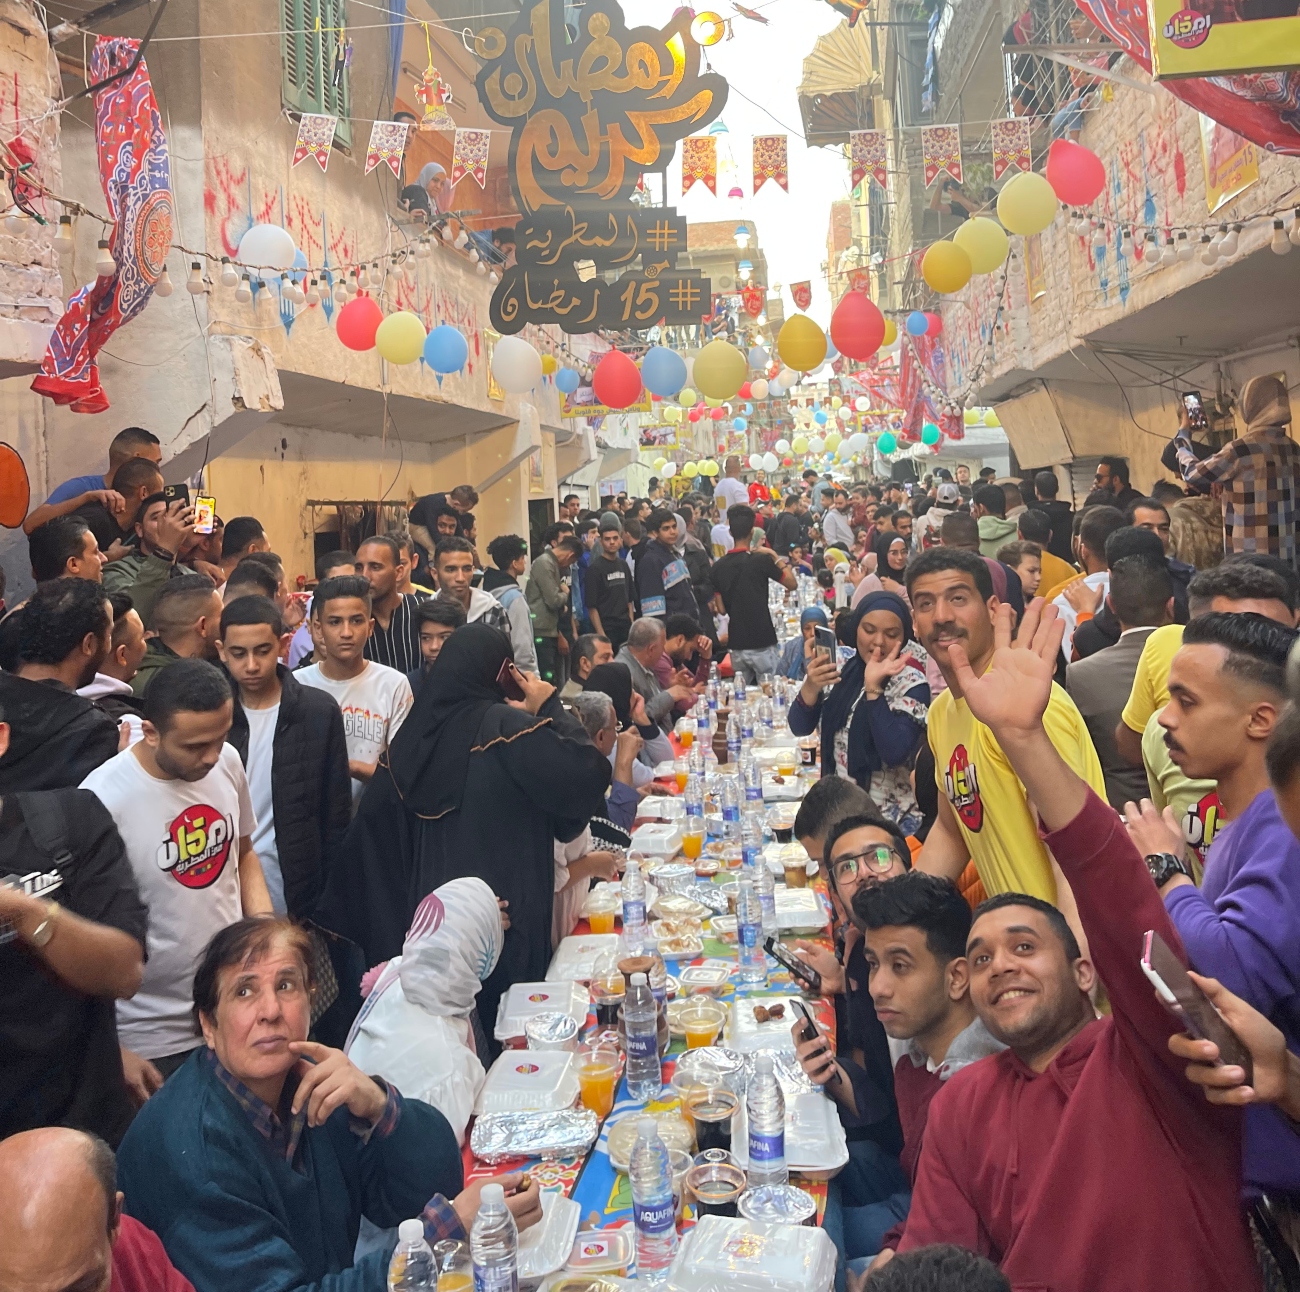 In Photos Celebrating Ramadan at Egypt’s Longest Iftar Table in